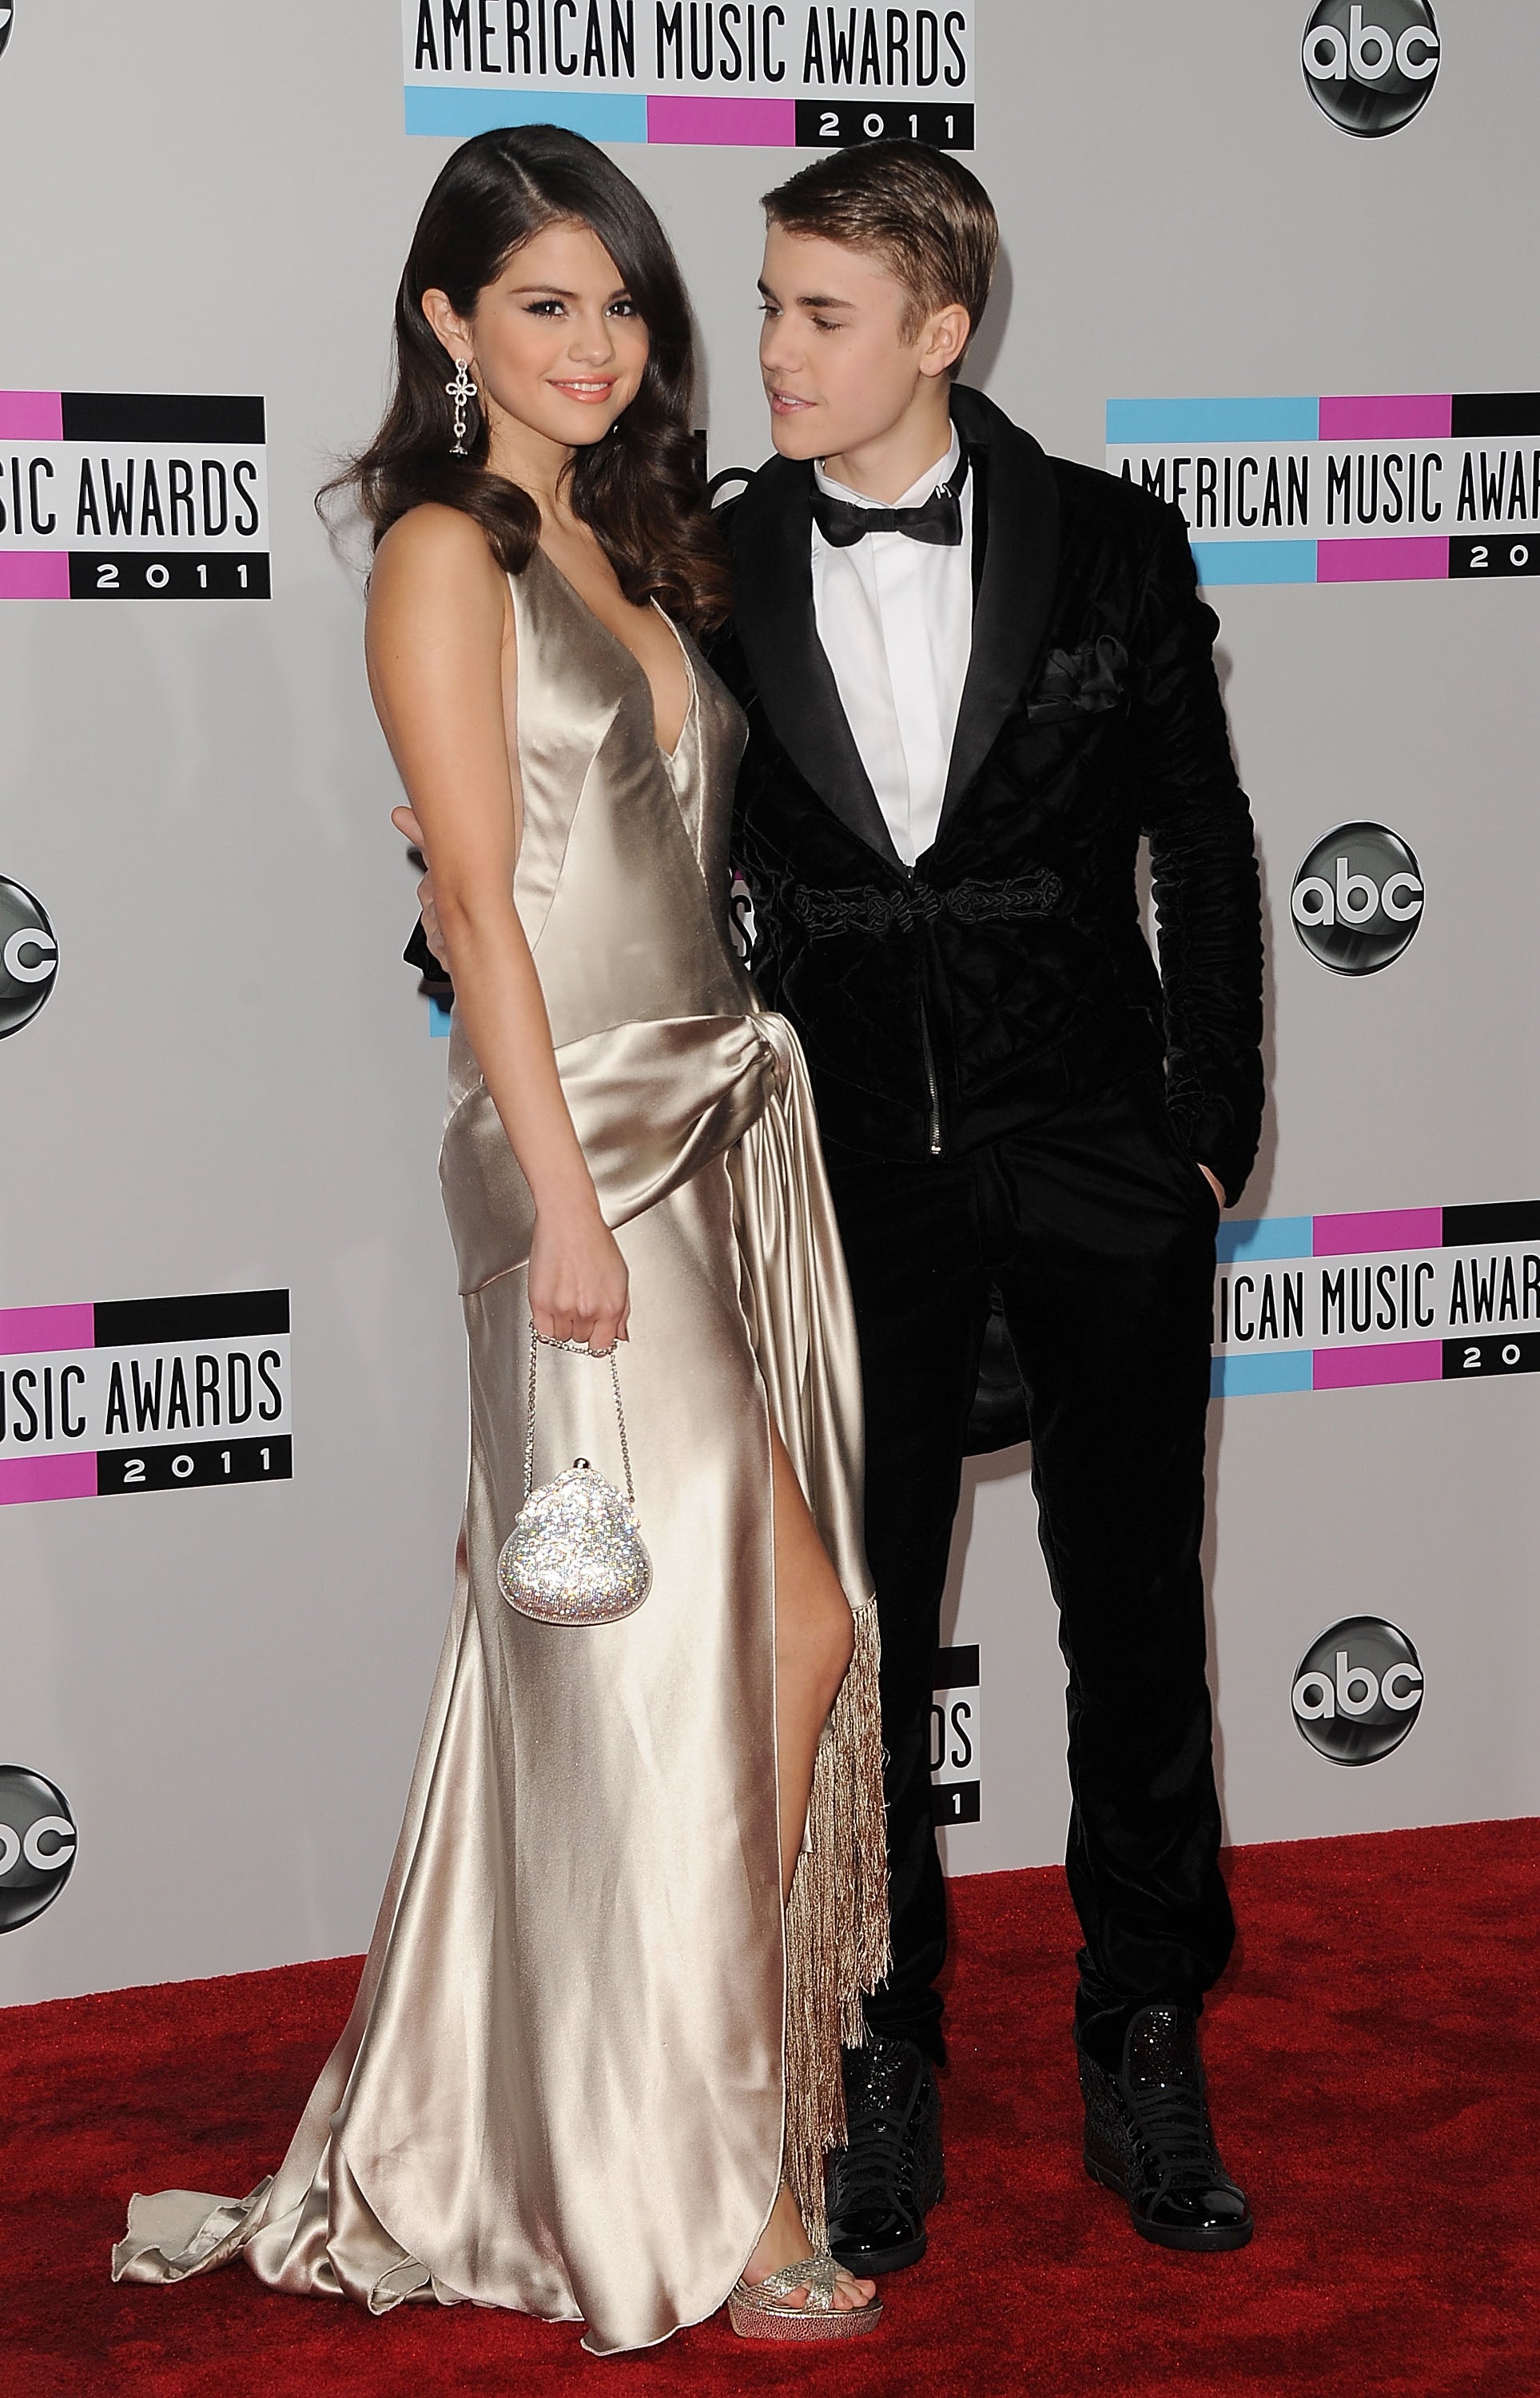 Justin Bieber and Selena Gomez dated on-and-off for 10 years